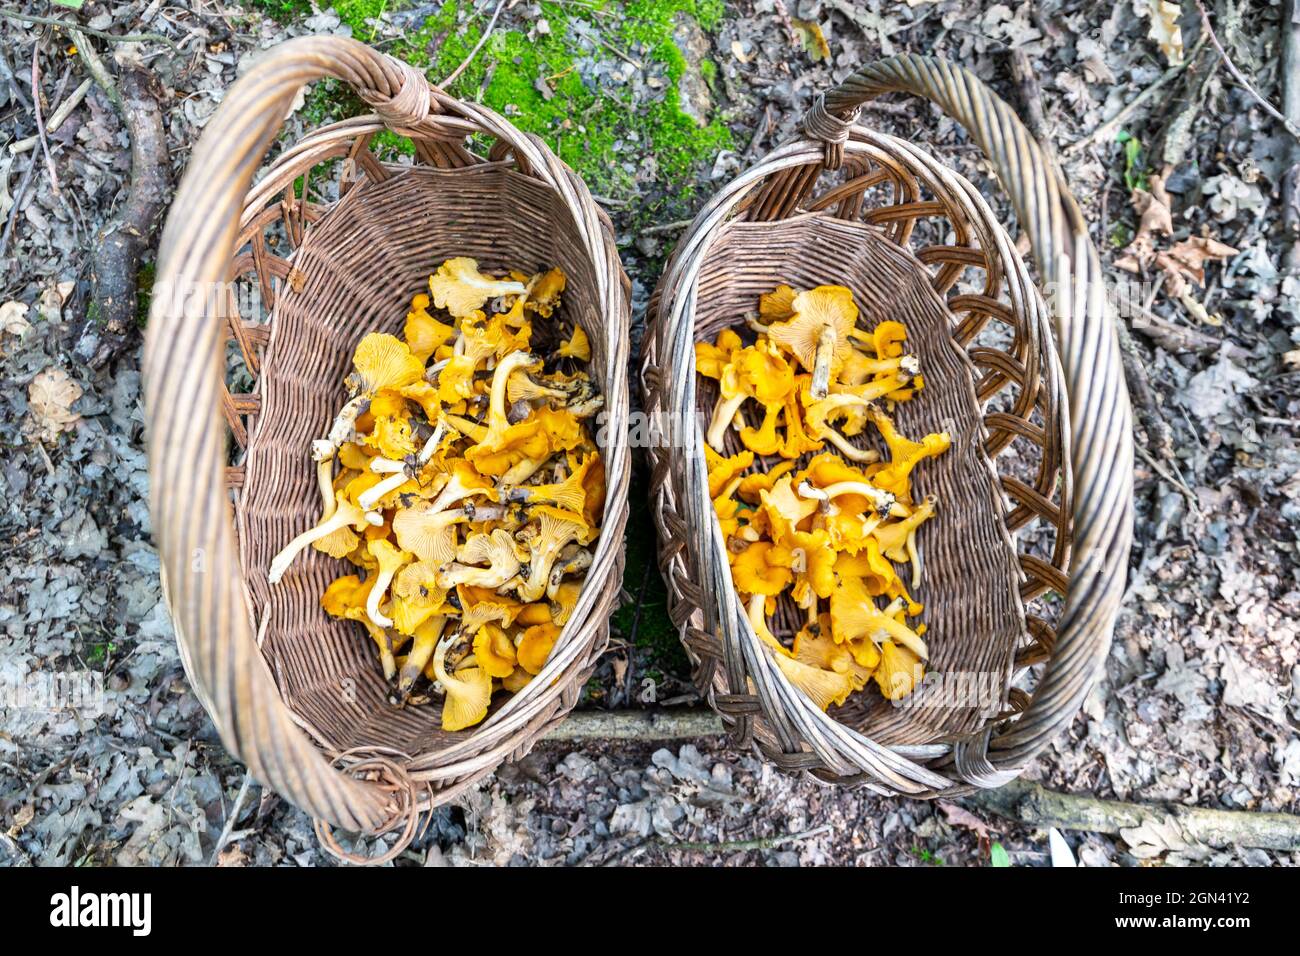 Two wicker baskets full of fresh raw Chanterelles (Cantharellus)  mushrooms gathered during mushroom hunting in autumn  in Poland. Stock Photo